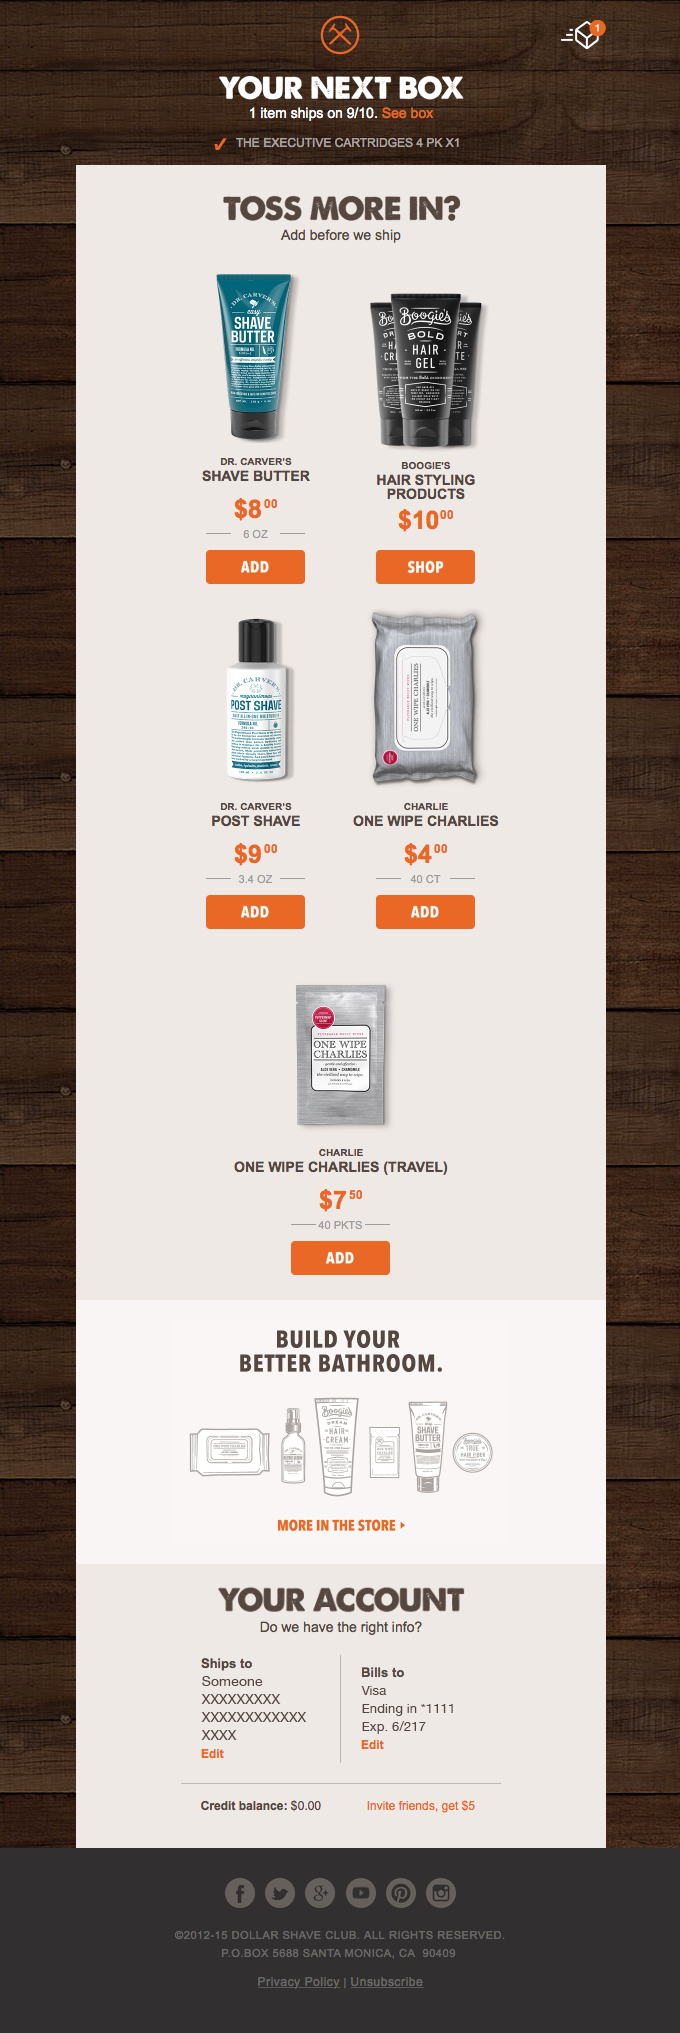 Dollar Shave Club Transactional Emails